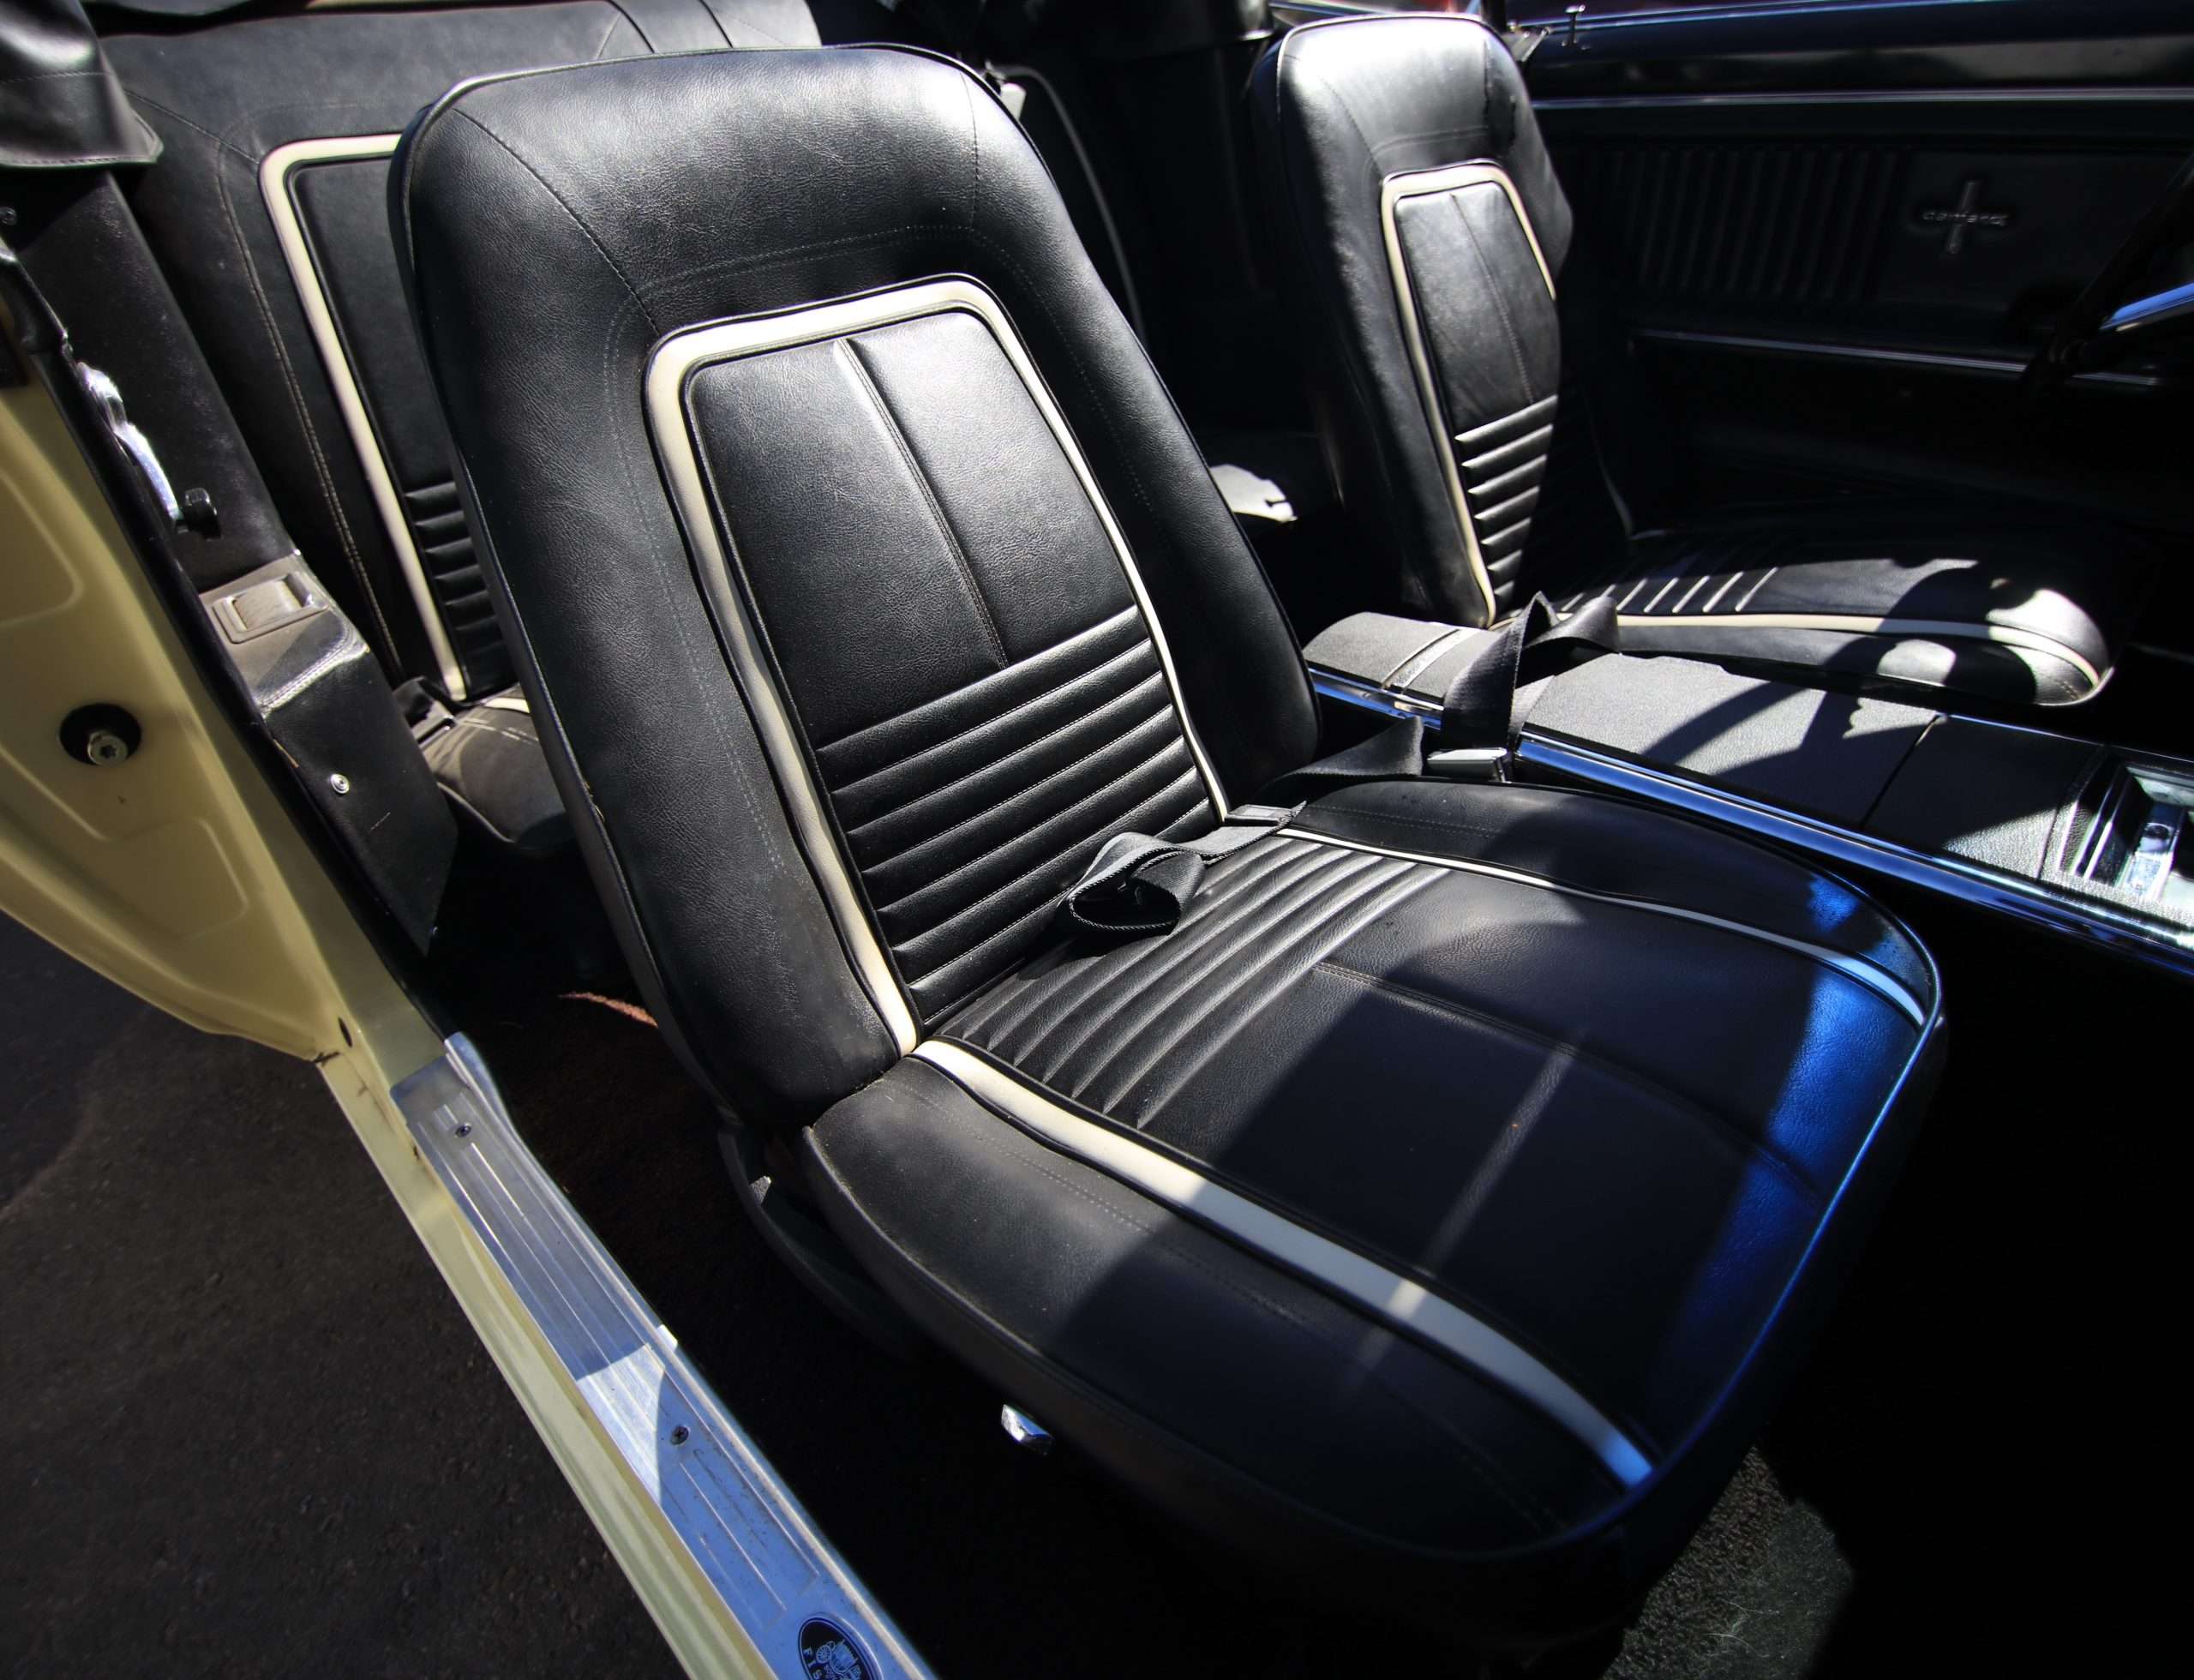 Westerner Seat Covers, North America's Best Seat Covers